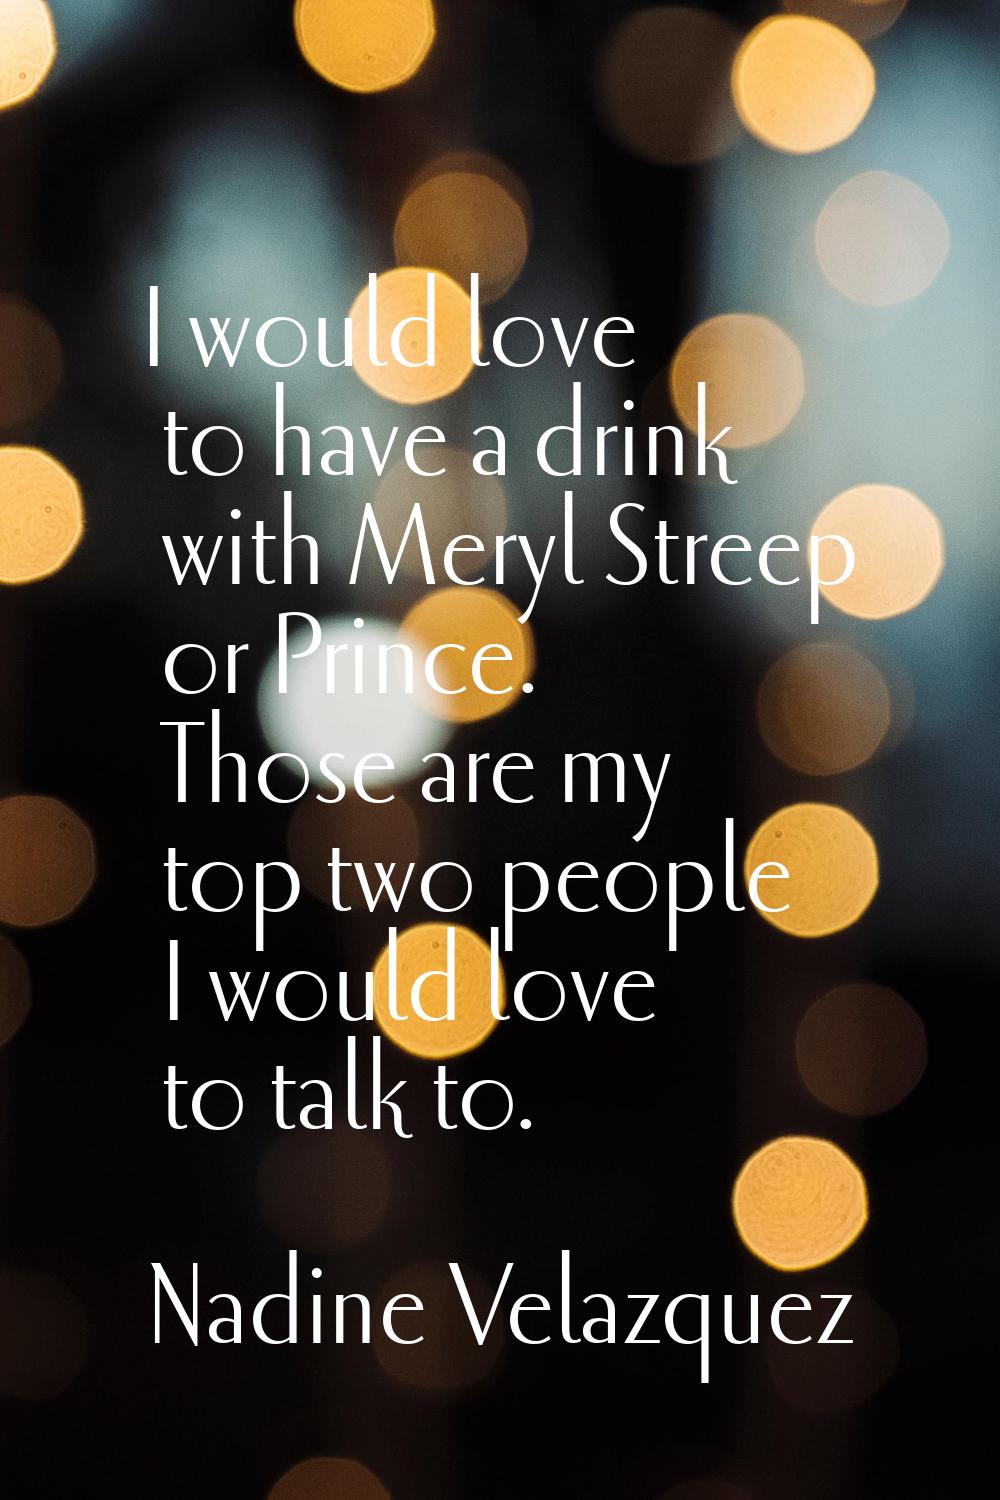 I would love to have a drink with Meryl Streep or Prince. Those are my top two people I would love 